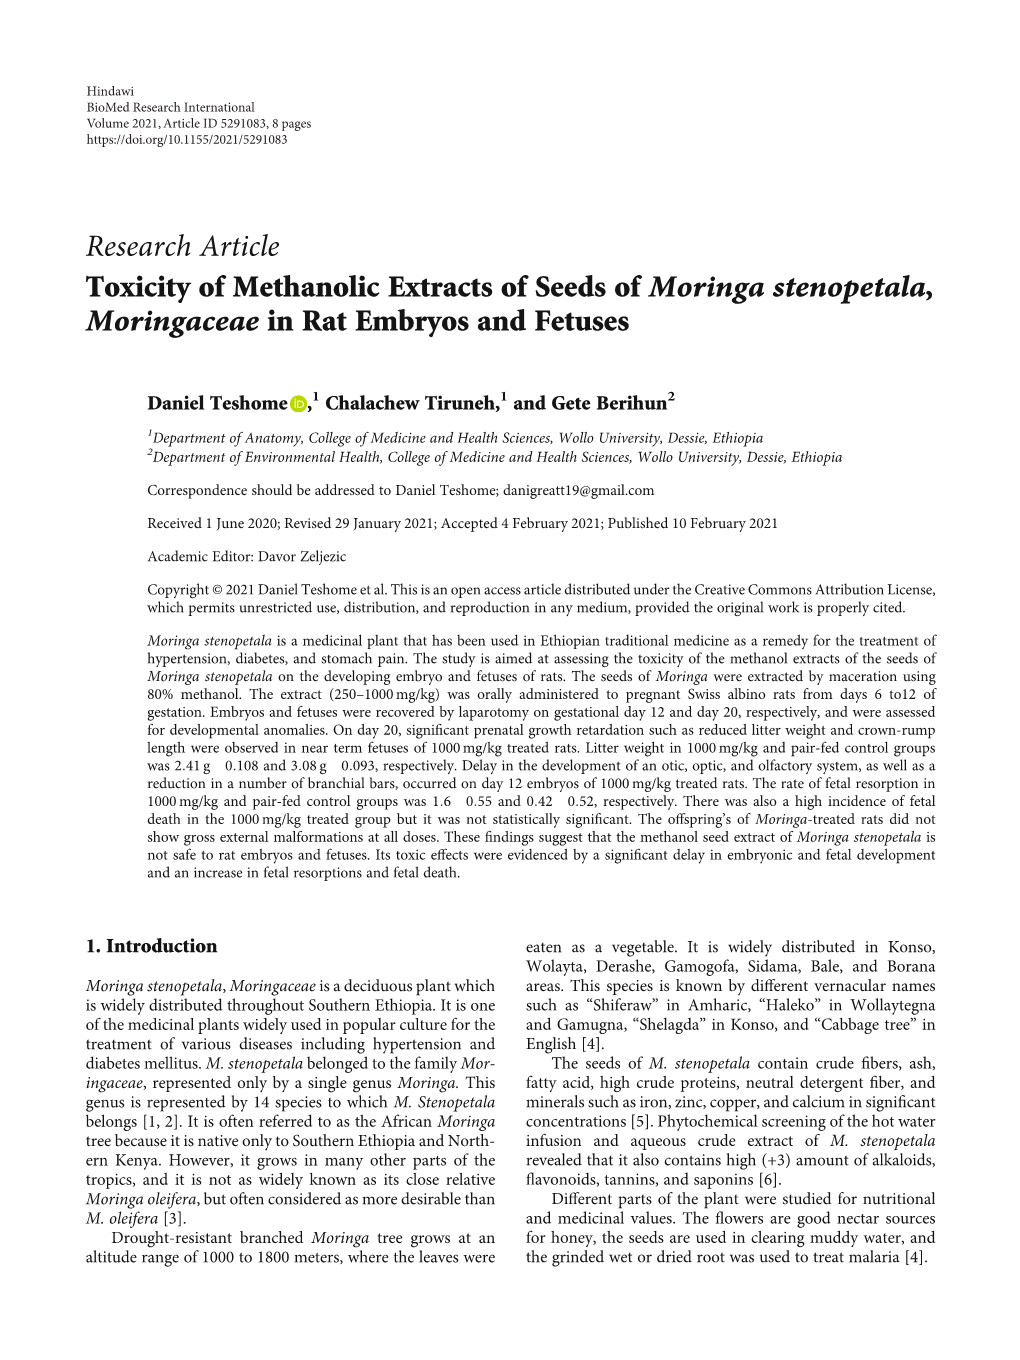 Research Article Toxicity of Methanolic Extracts of Seeds of Moringa Stenopetala, Moringaceae in Rat Embryos and Fetuses